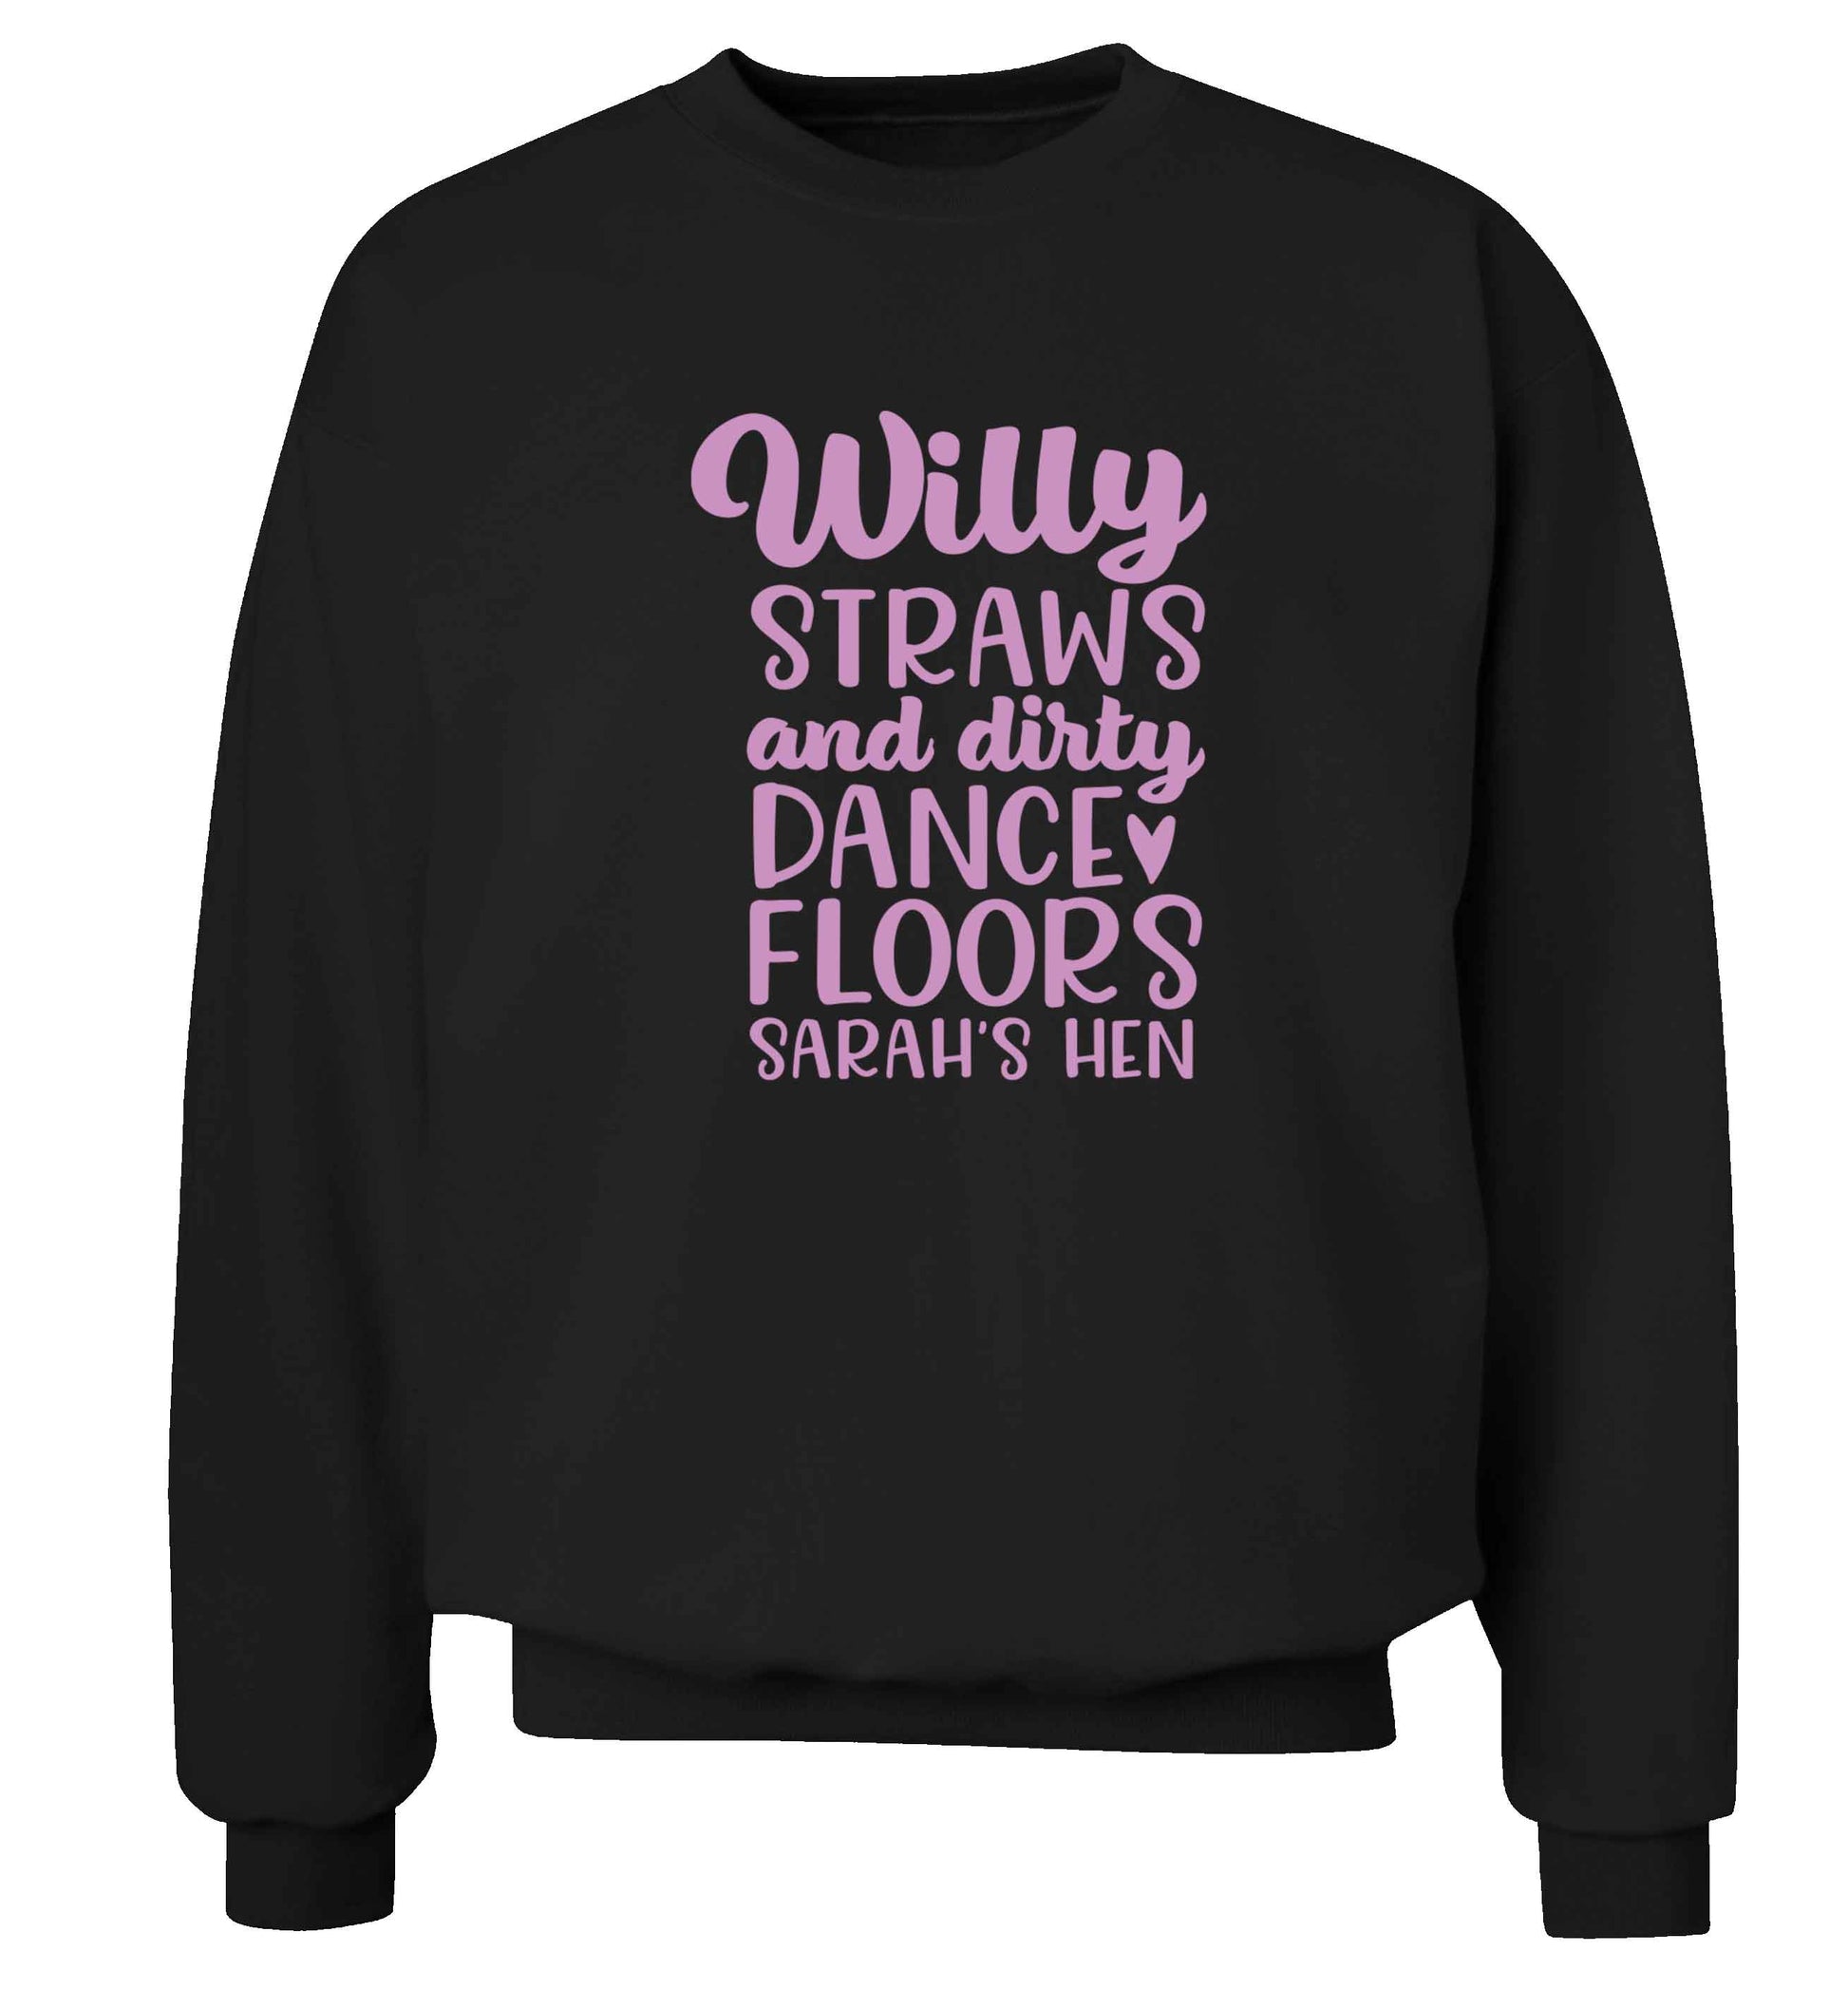 Willy straws and dirty dance floors adult's unisex black sweater 2XL